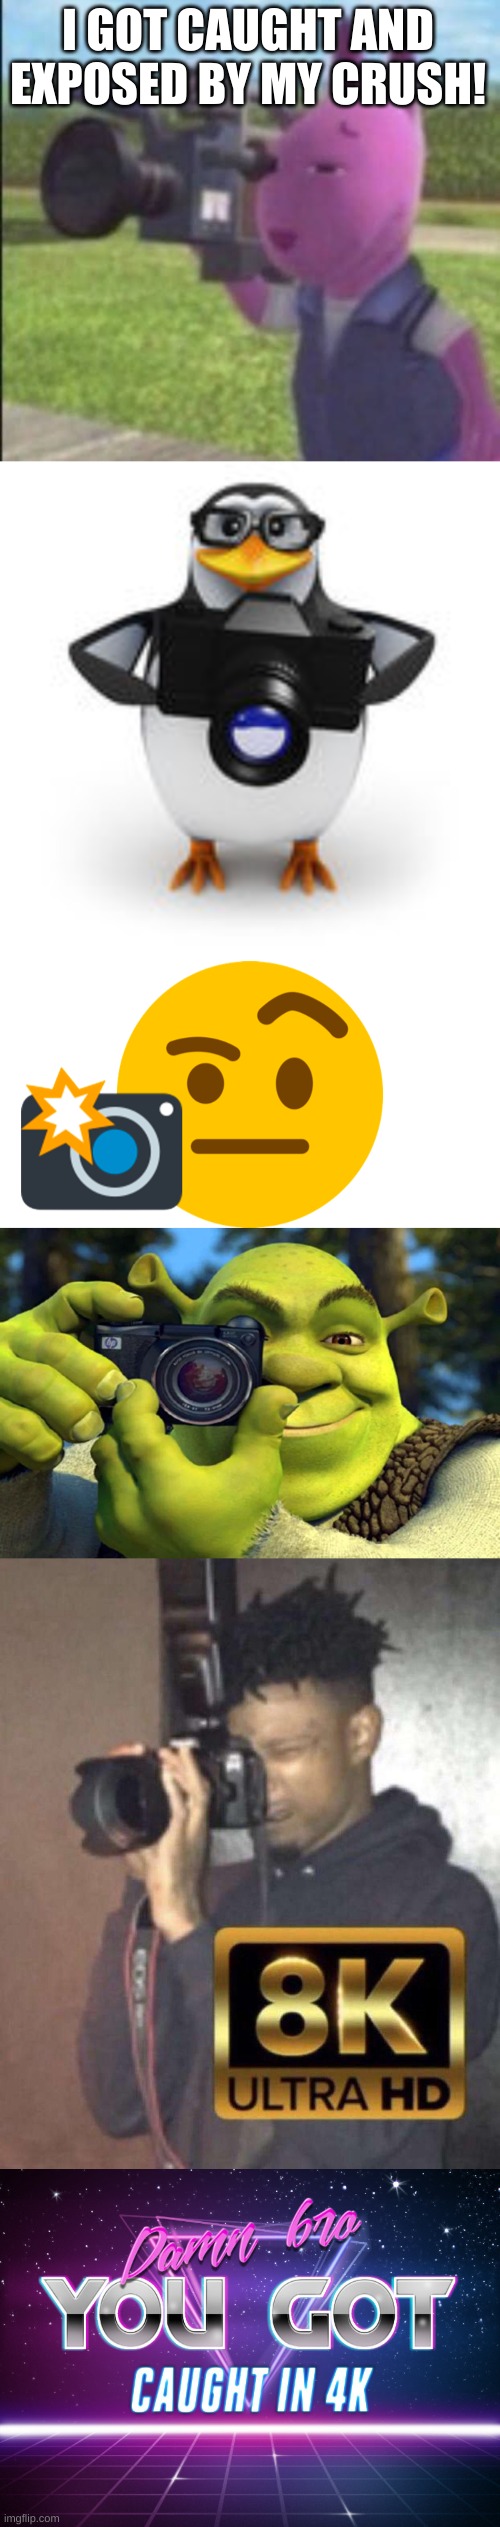 So caught now. | I GOT CAUGHT AND EXPOSED BY MY CRUSH! | image tagged in caught in 4k,caught in 4k emoji,shrek caught in 4k,caught in 8k,damn bro you got caught in 4k | made w/ Imgflip meme maker